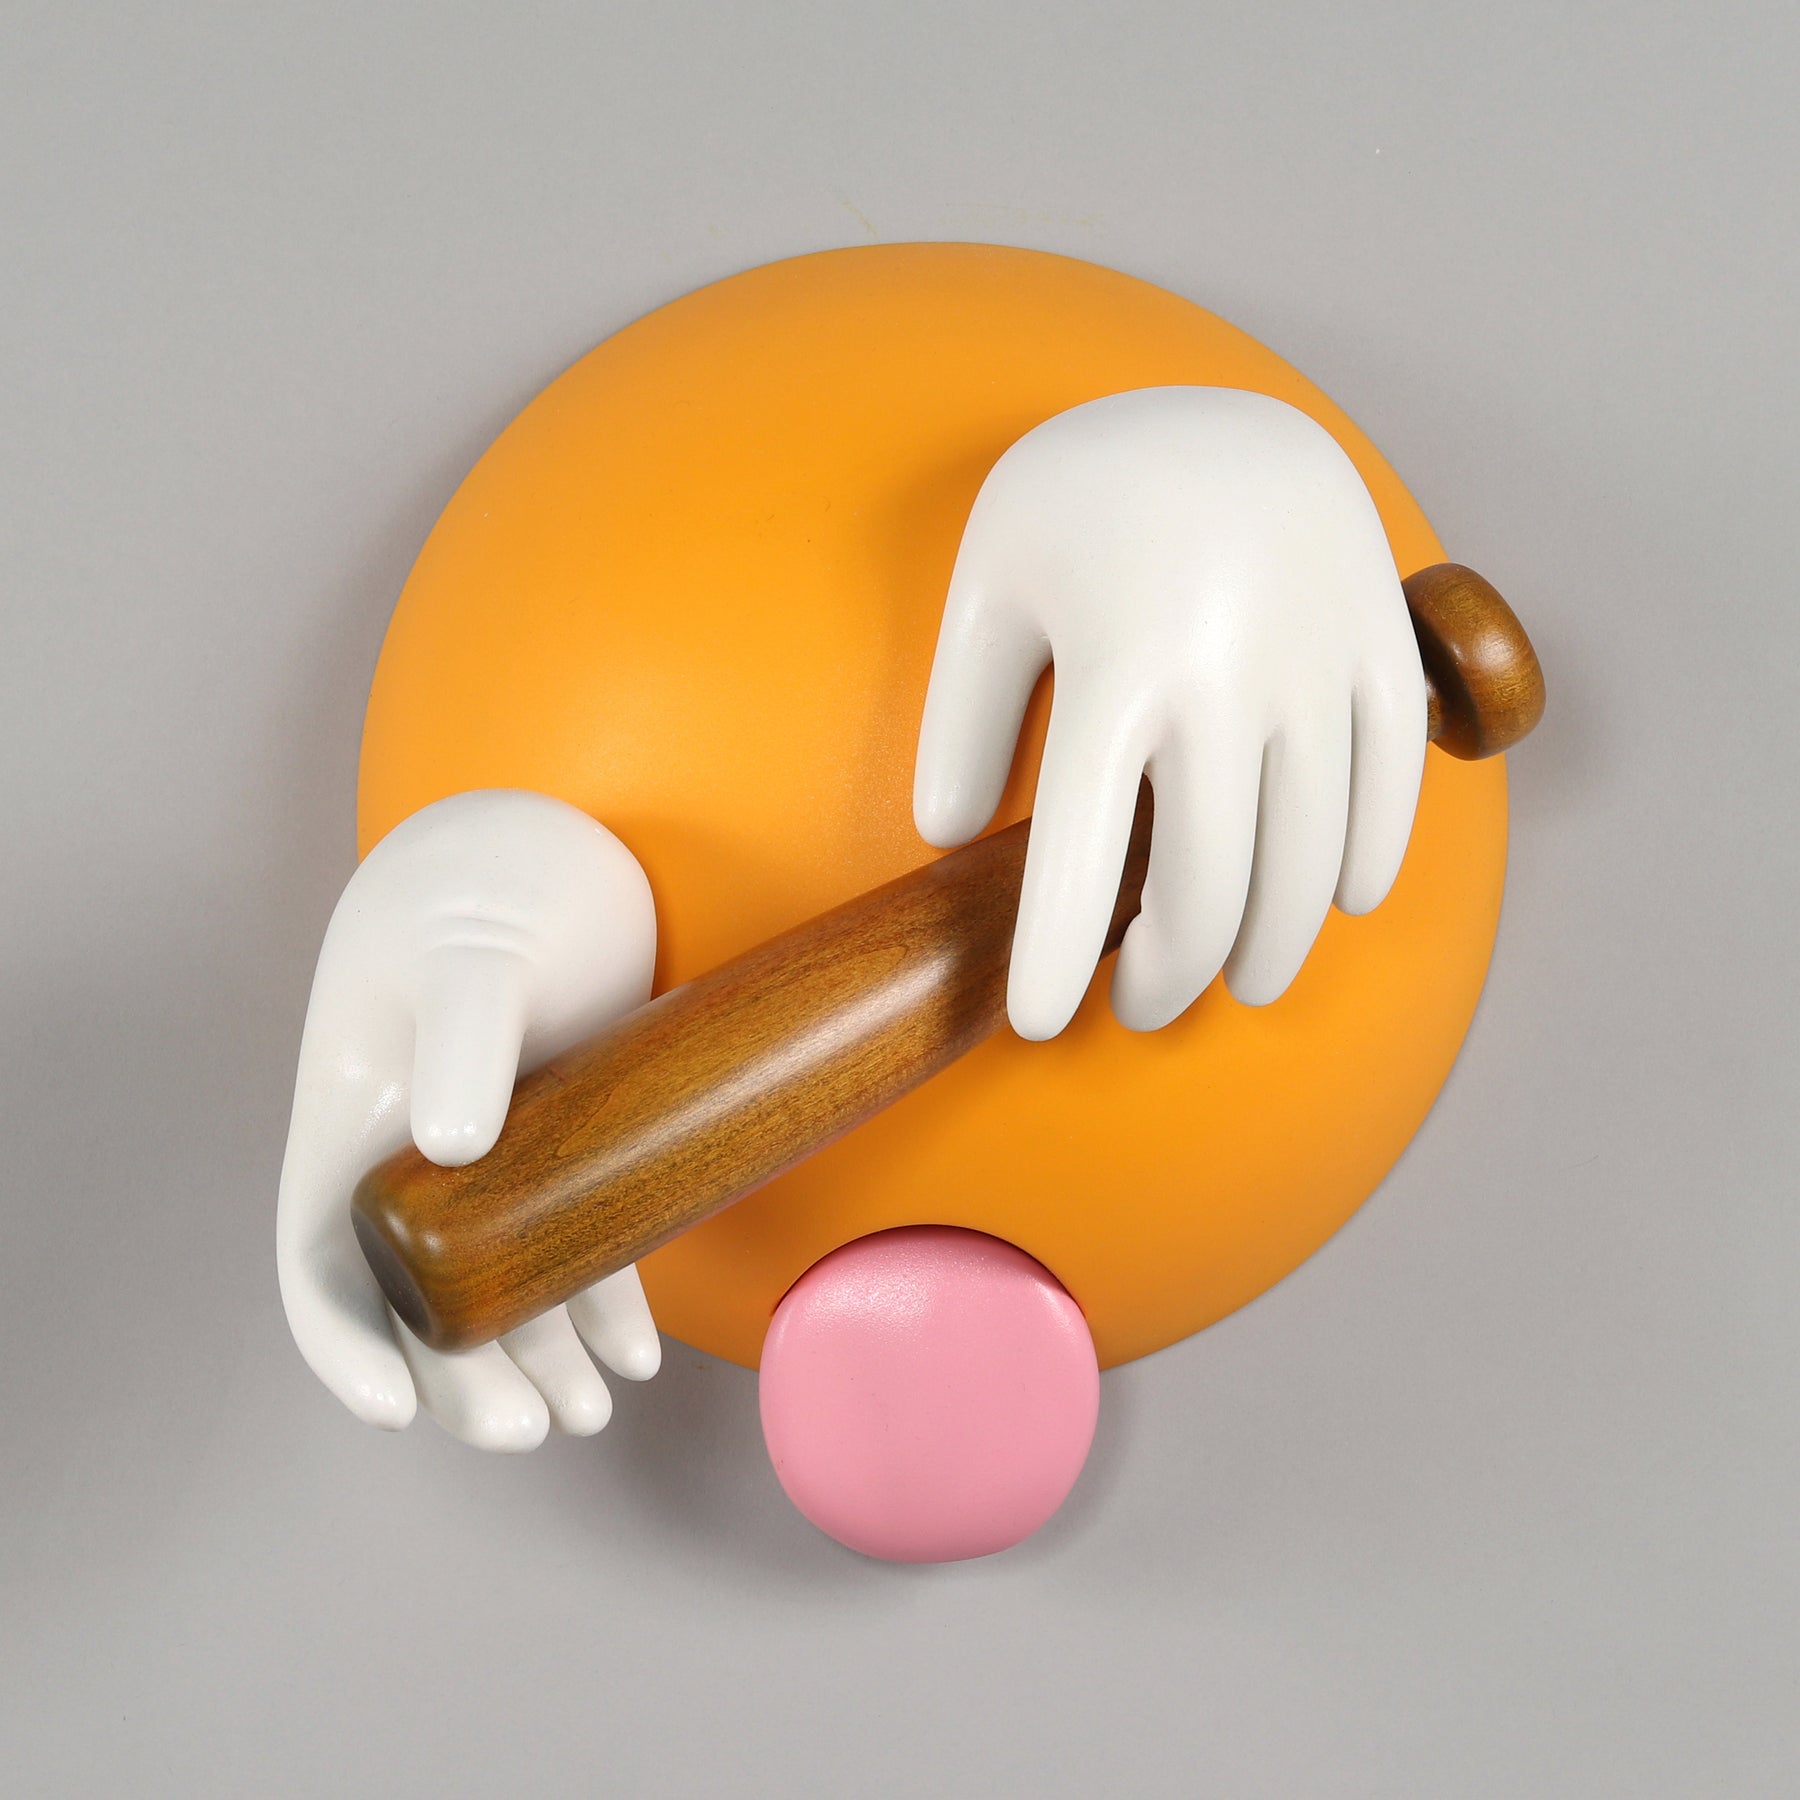 Sculpture of an emoji with hands holding a baseball bat and sticking out its tongue by Gale Hart.